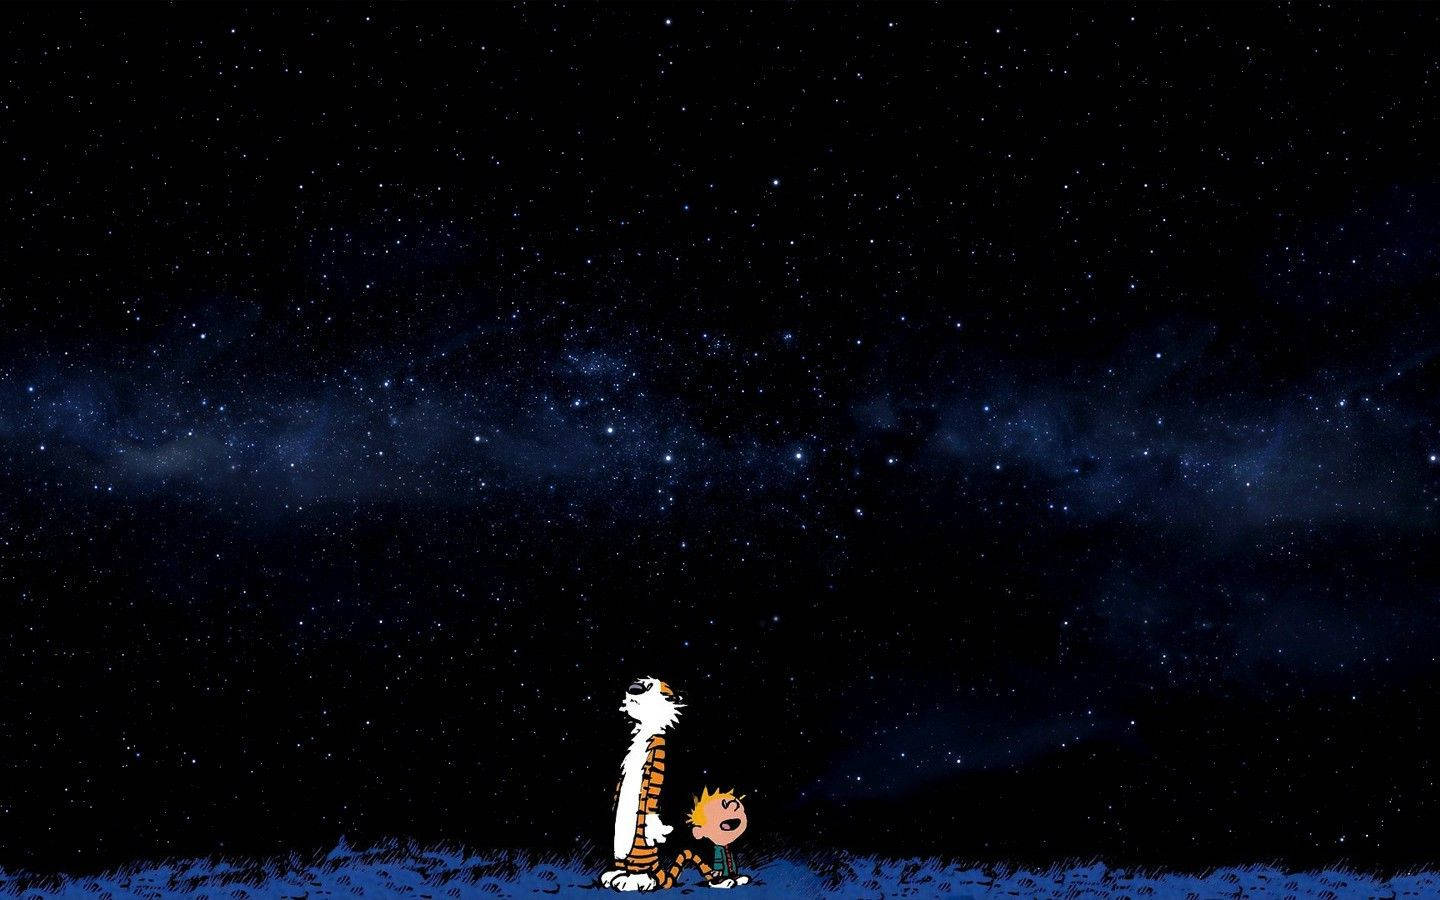 "Making the Most of a Starry Night" Wallpaper